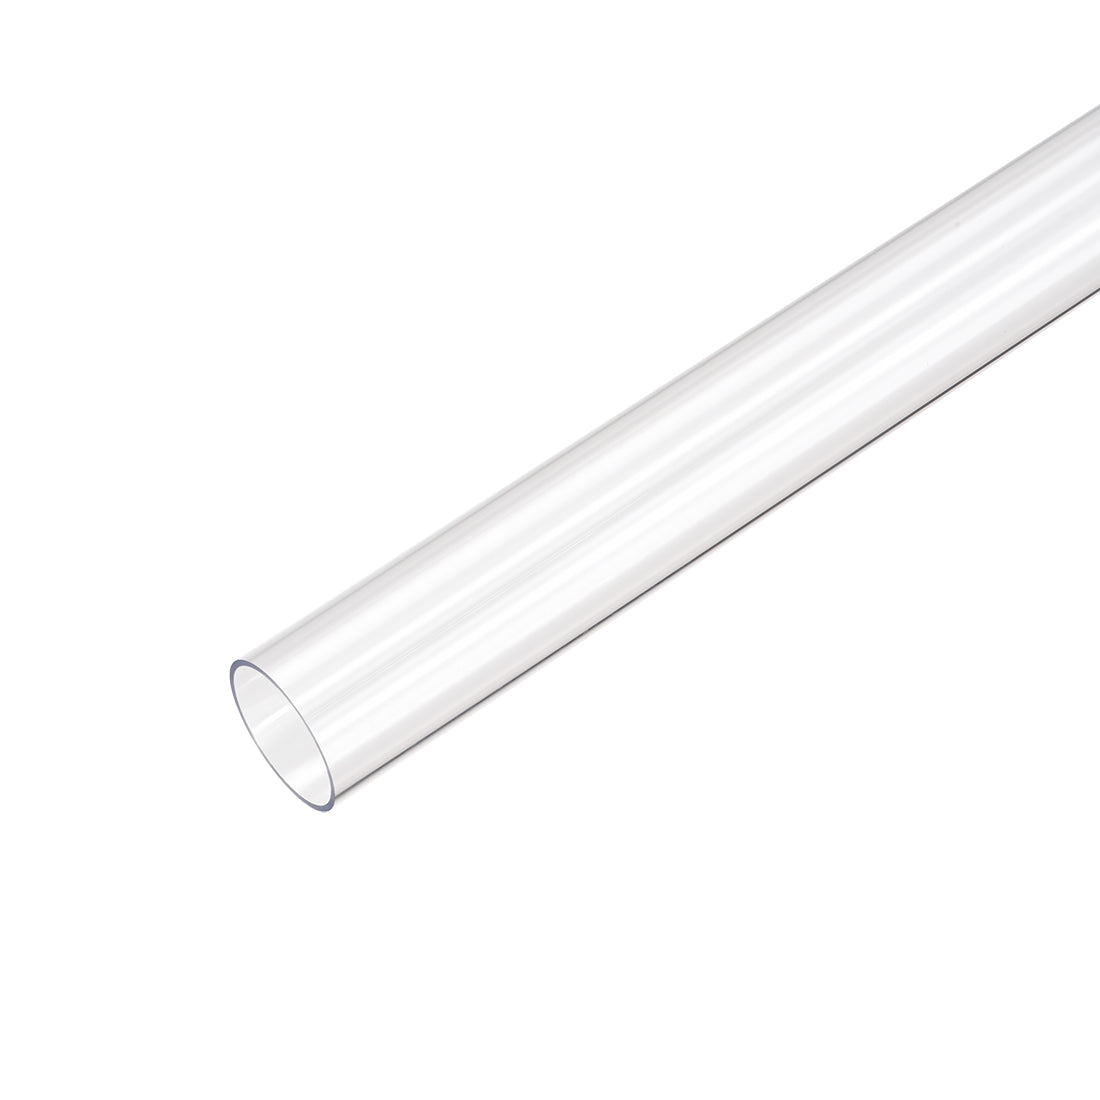 uxcell Uxcell PC Rigid Round Tubing Clear,18mm ID x 20mm OD, 0.5M/1.64Ft Length 3pcs